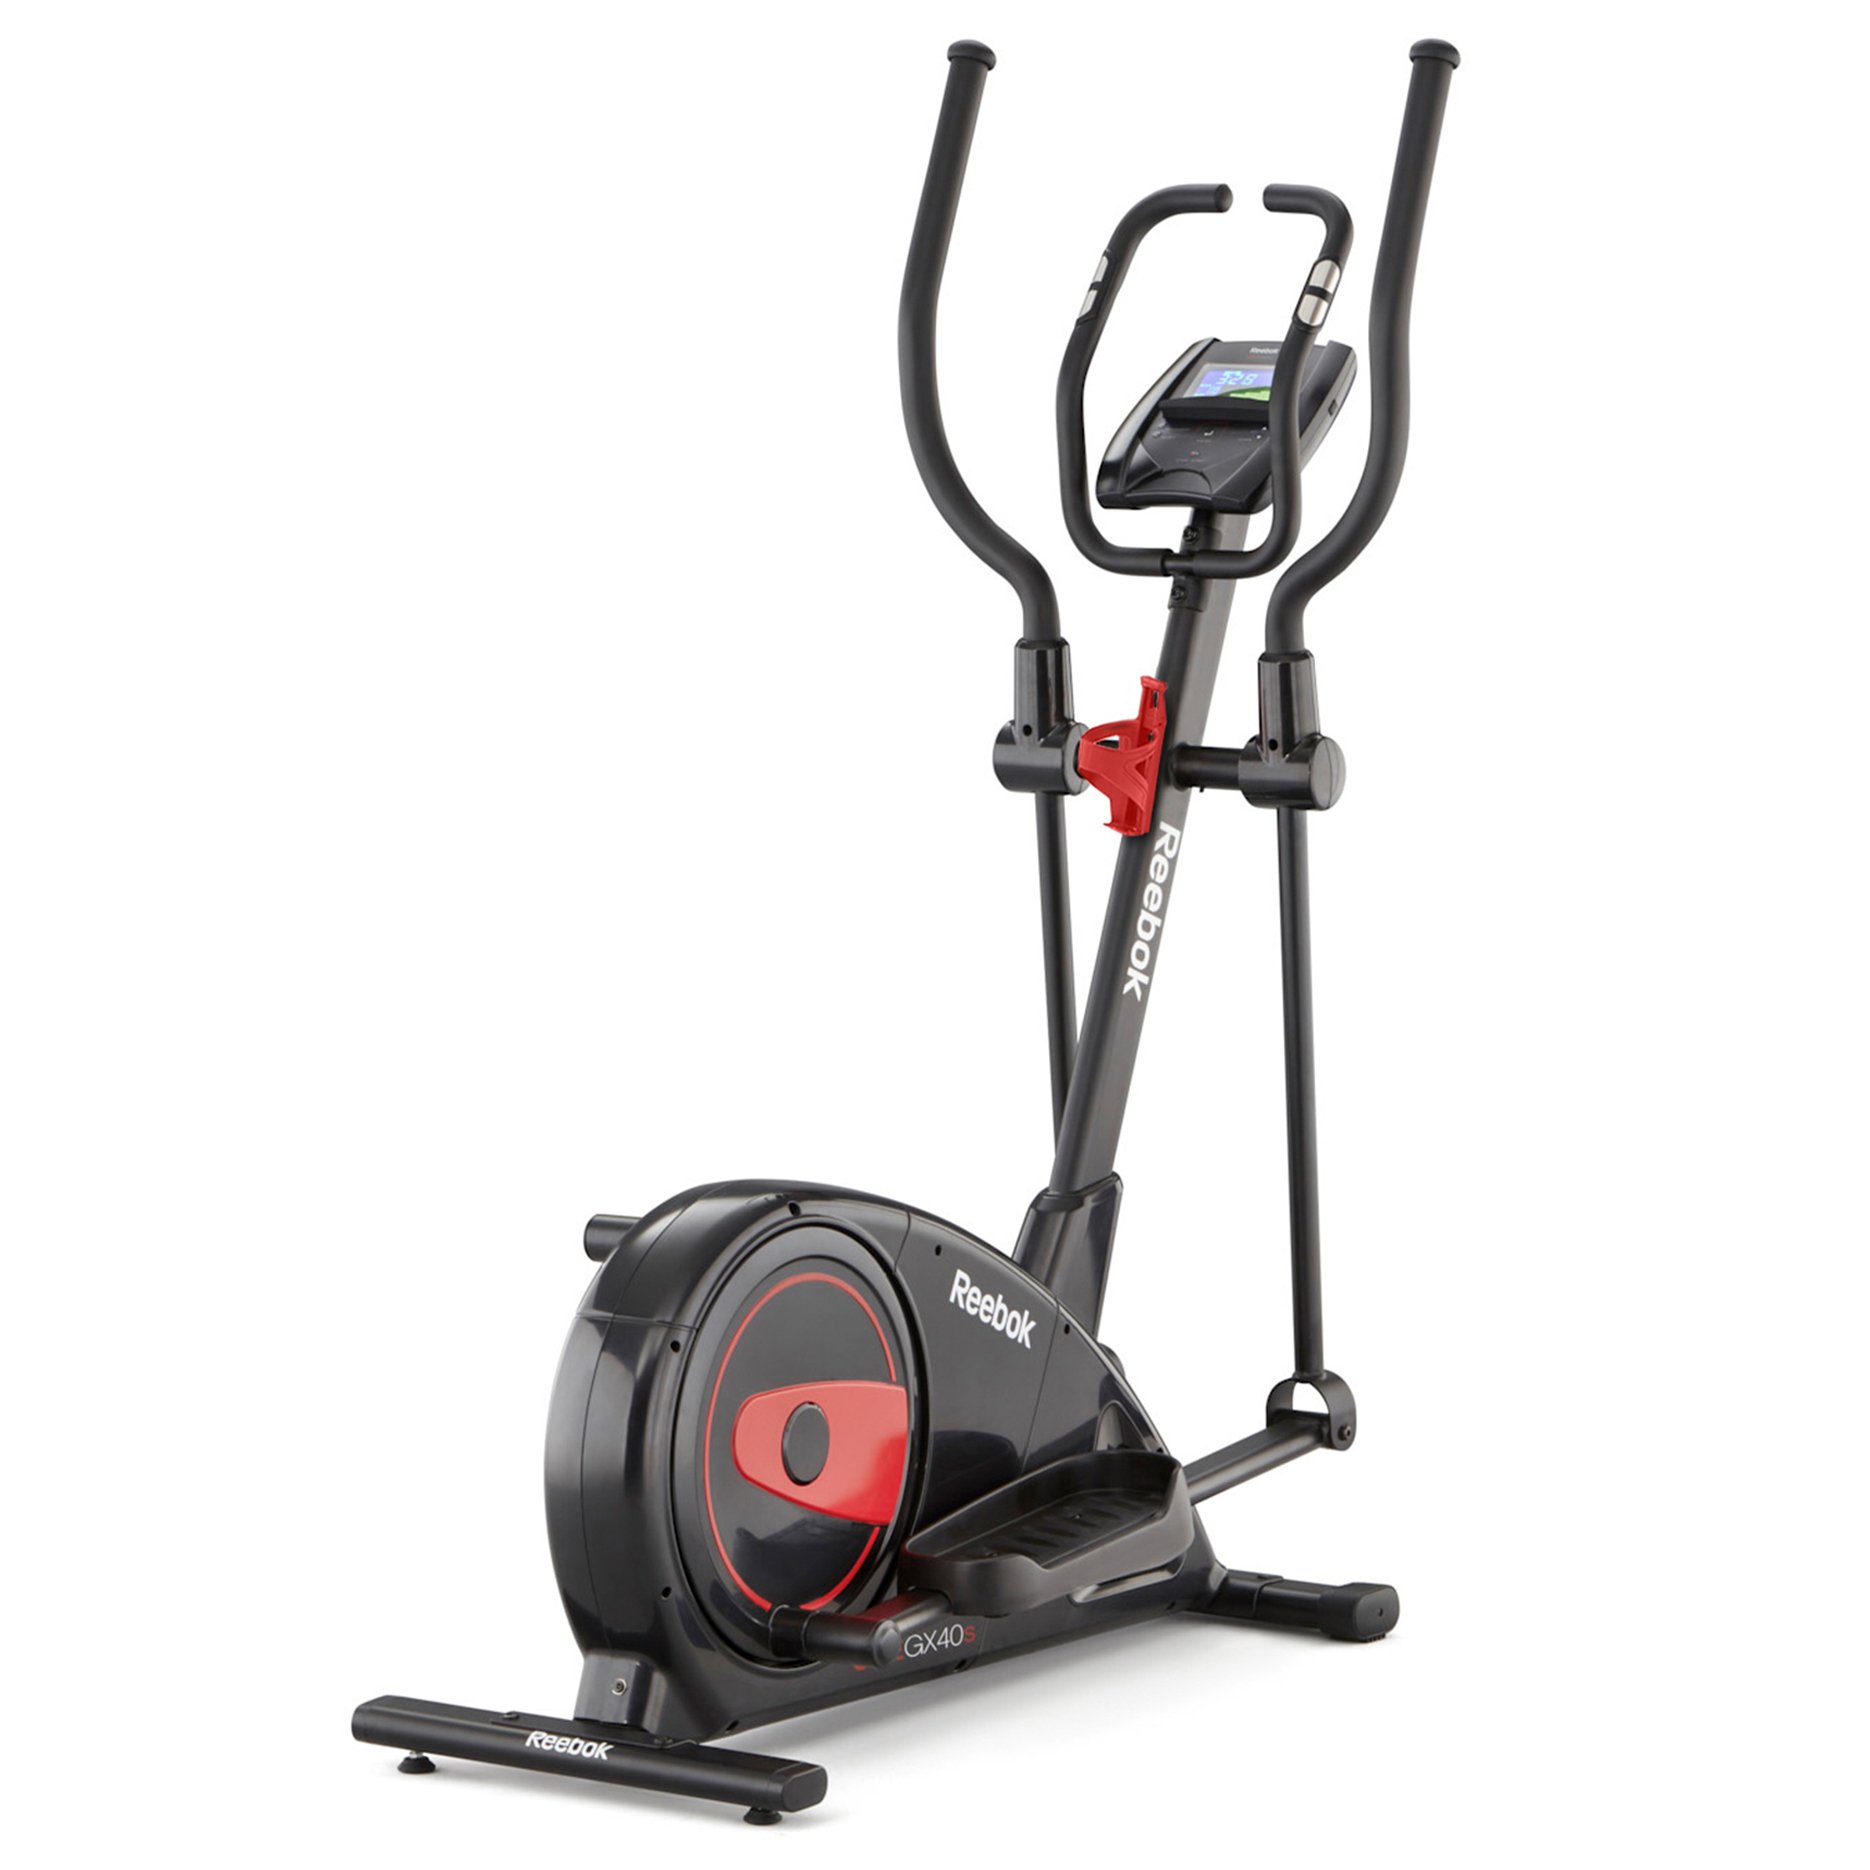 GX40s One Electronic Cross Trainer 